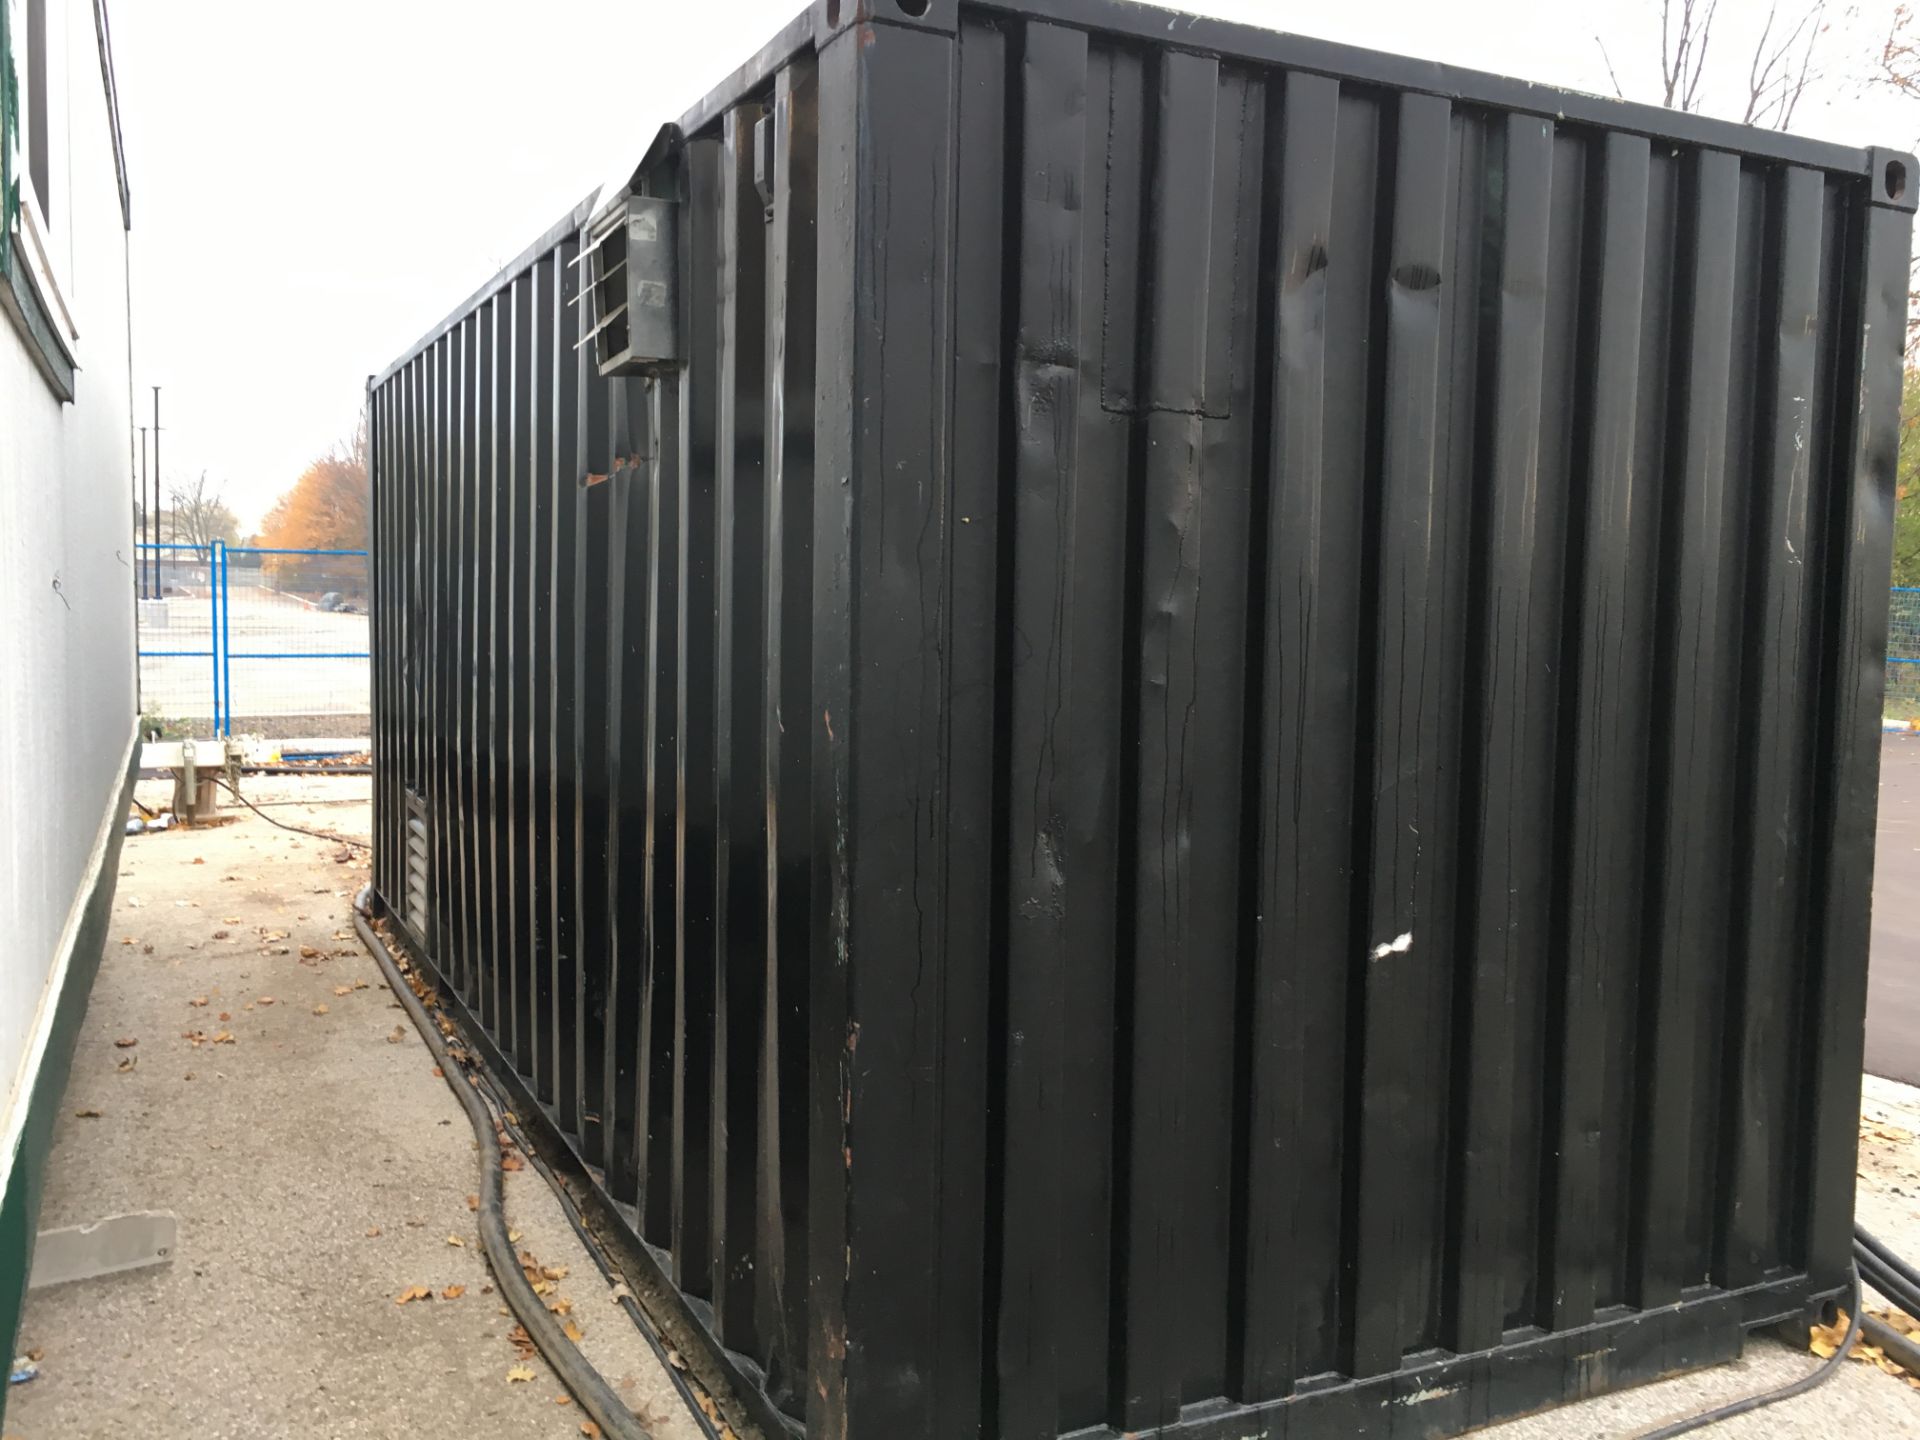 20' X 8' TEMPORARY POWER SEA CONTAINER W/600V TO 400A FUSIBLE DISCONNECT 3 PHASE, 400A/600V - Image 3 of 5